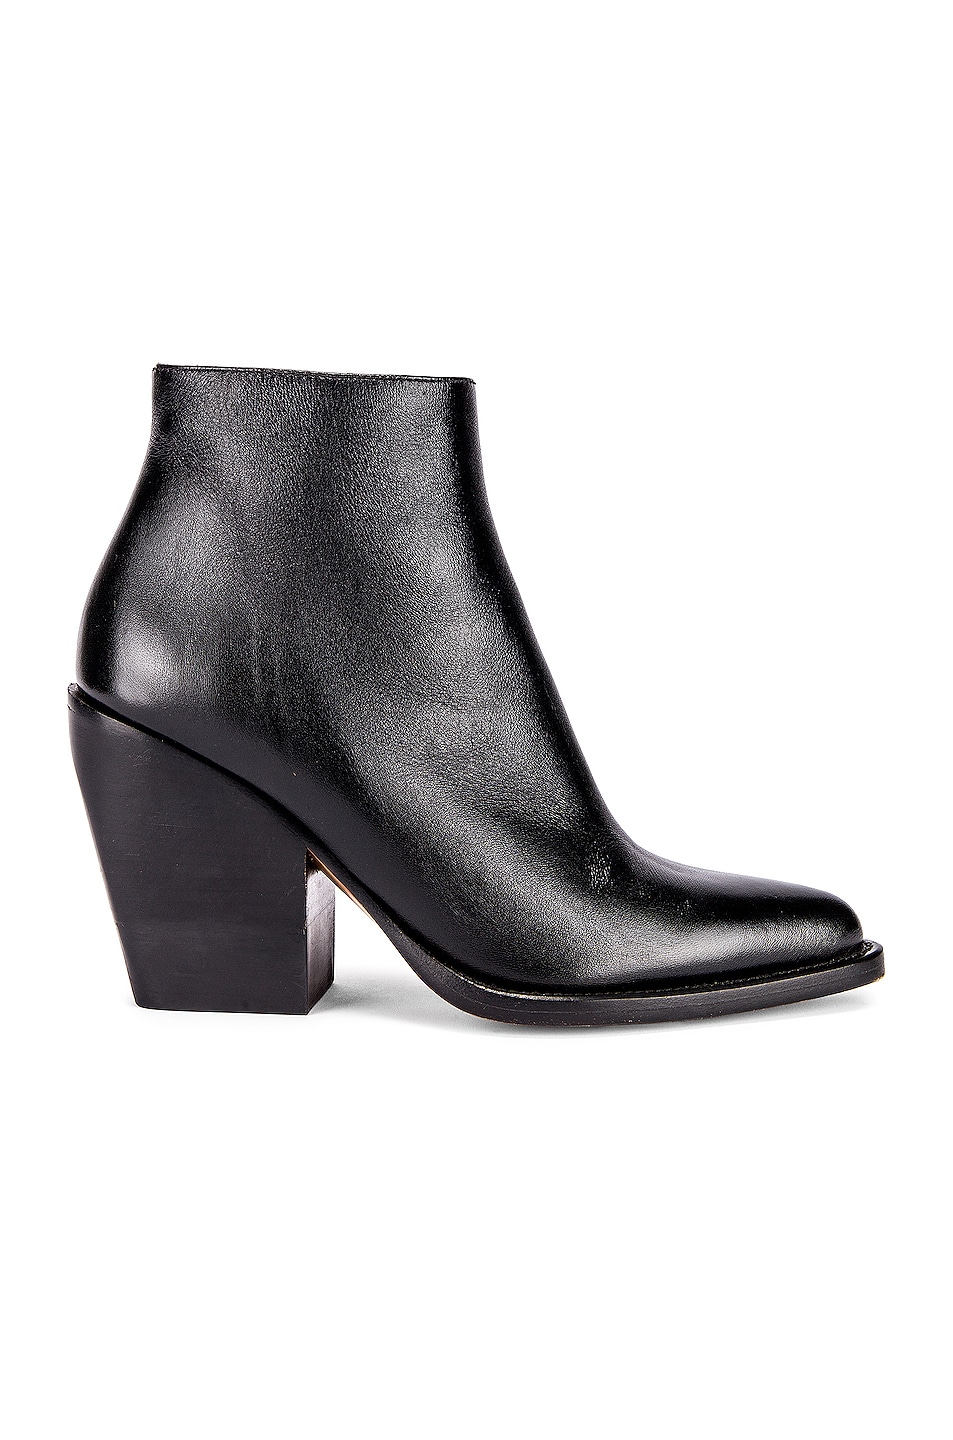 Image 1 of Chloe Rylee Ankle Boots in Black